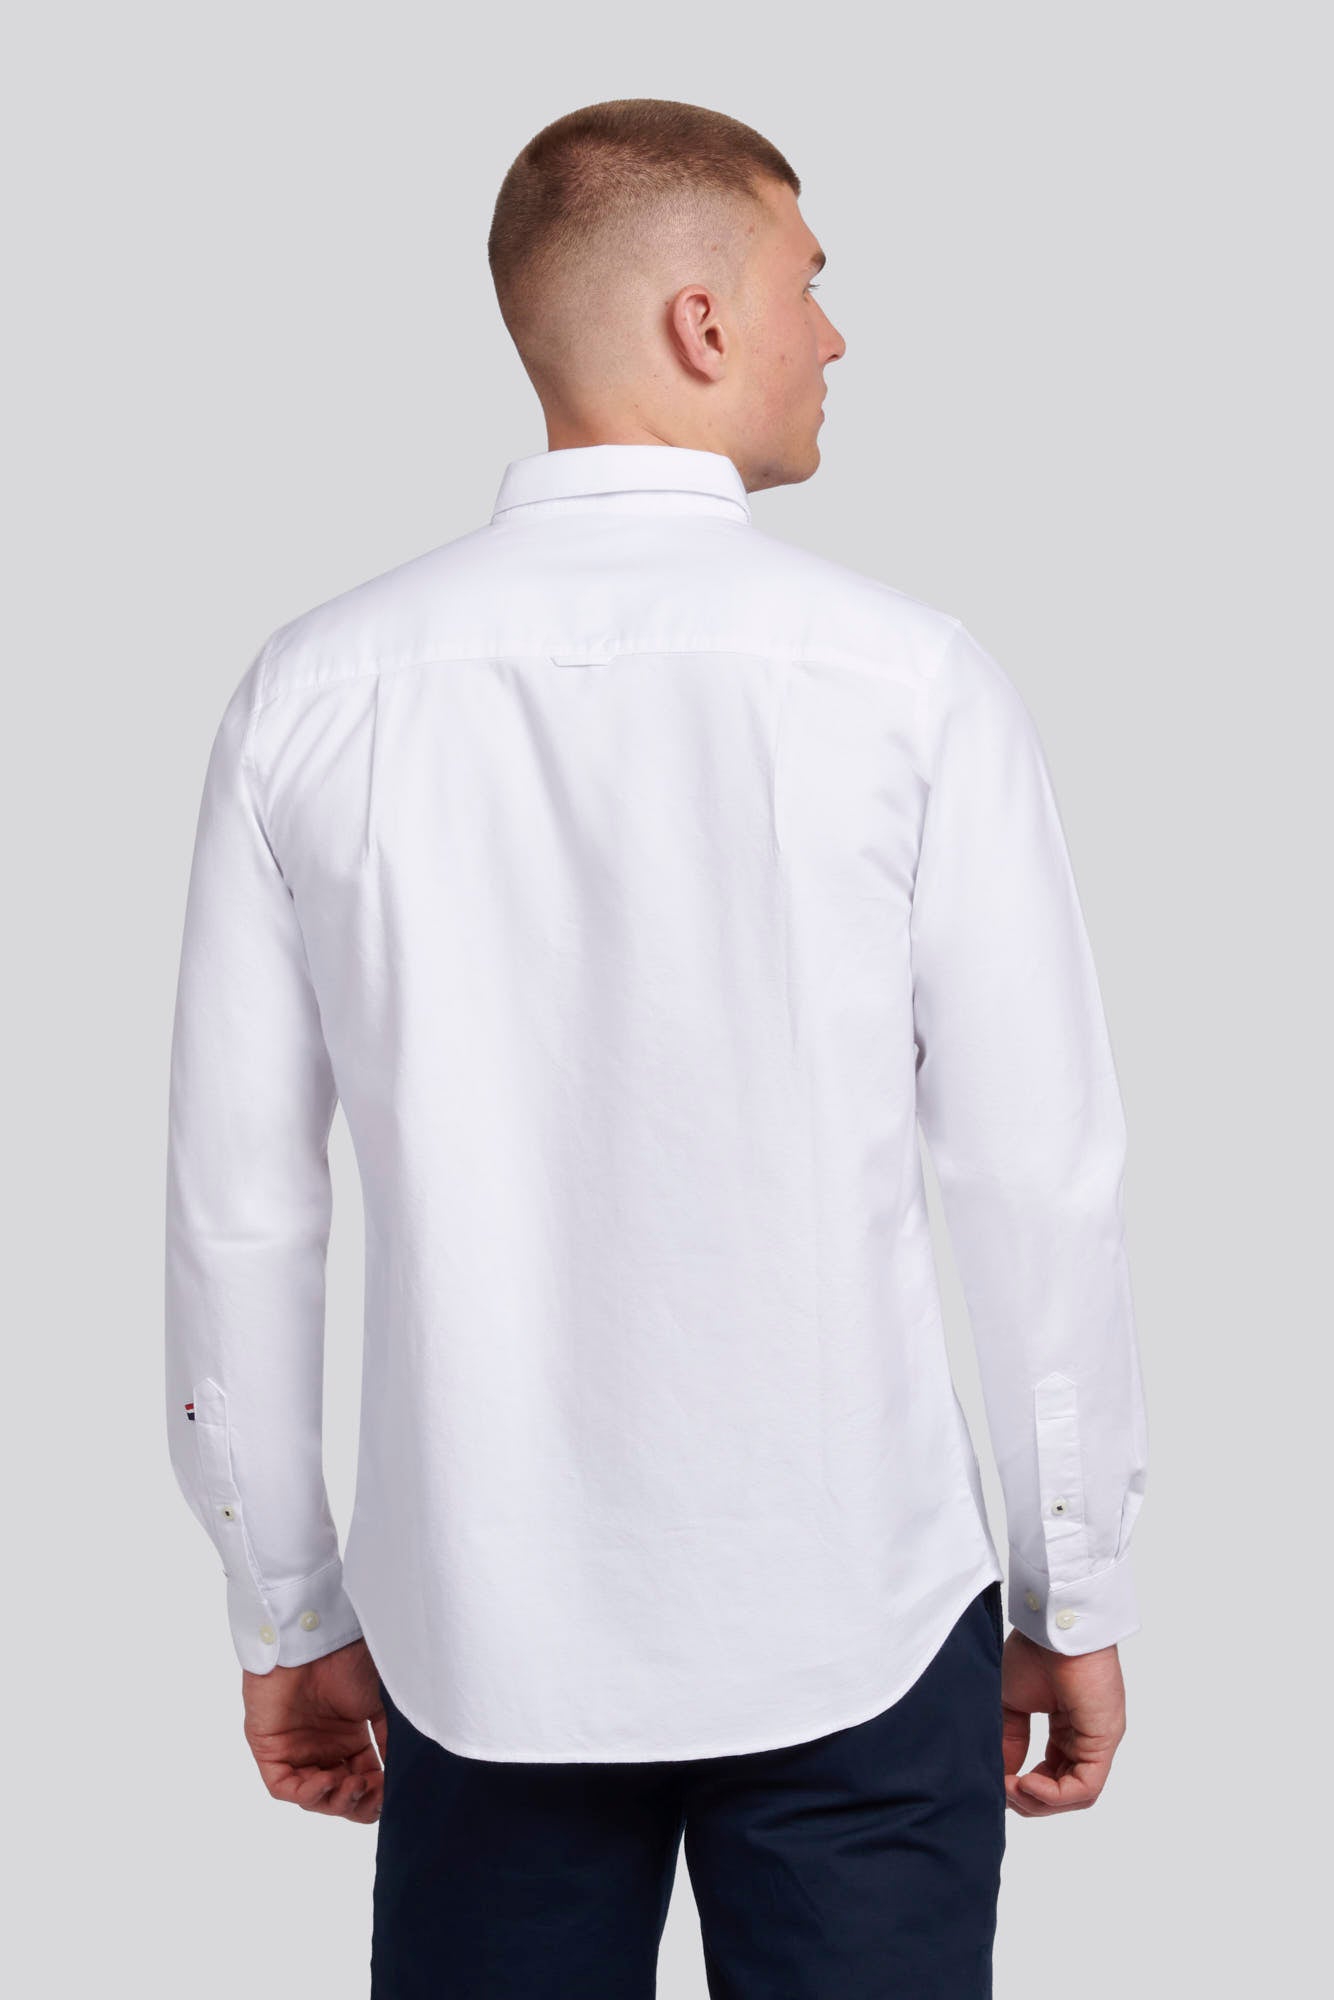 Mens Oxford Shirt in Bright White